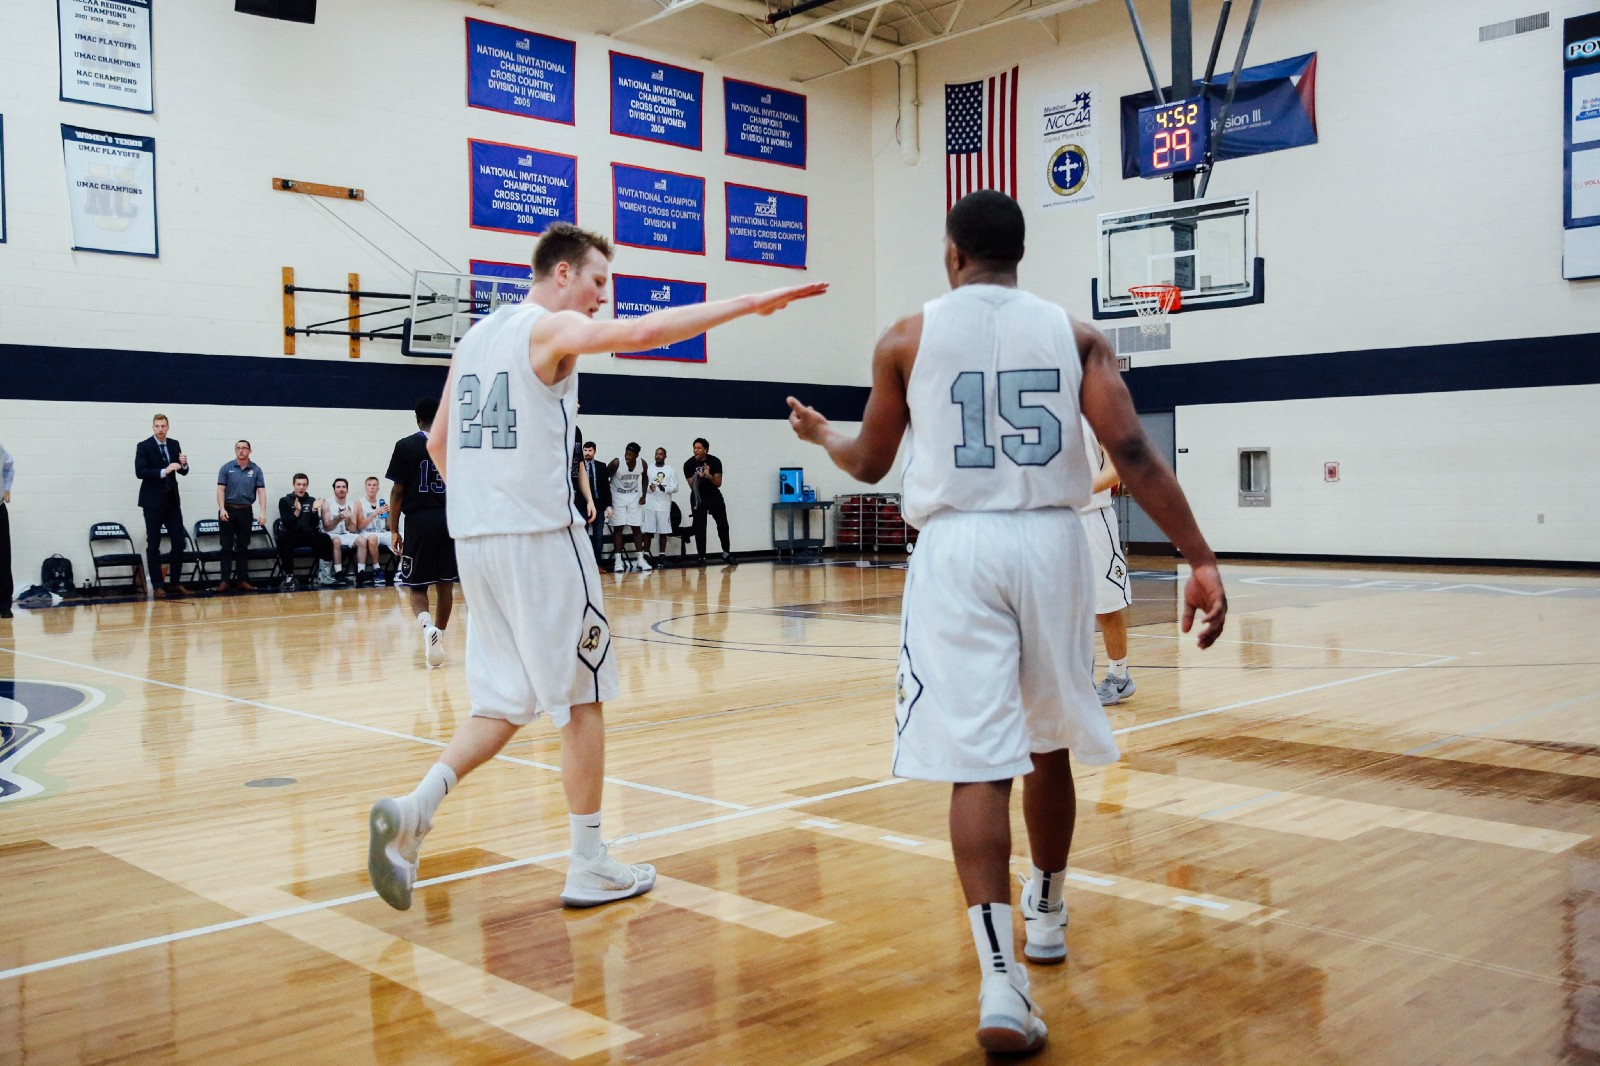 Two basketball teammates high fiving in an indoor basketball court wearing white uniforms.